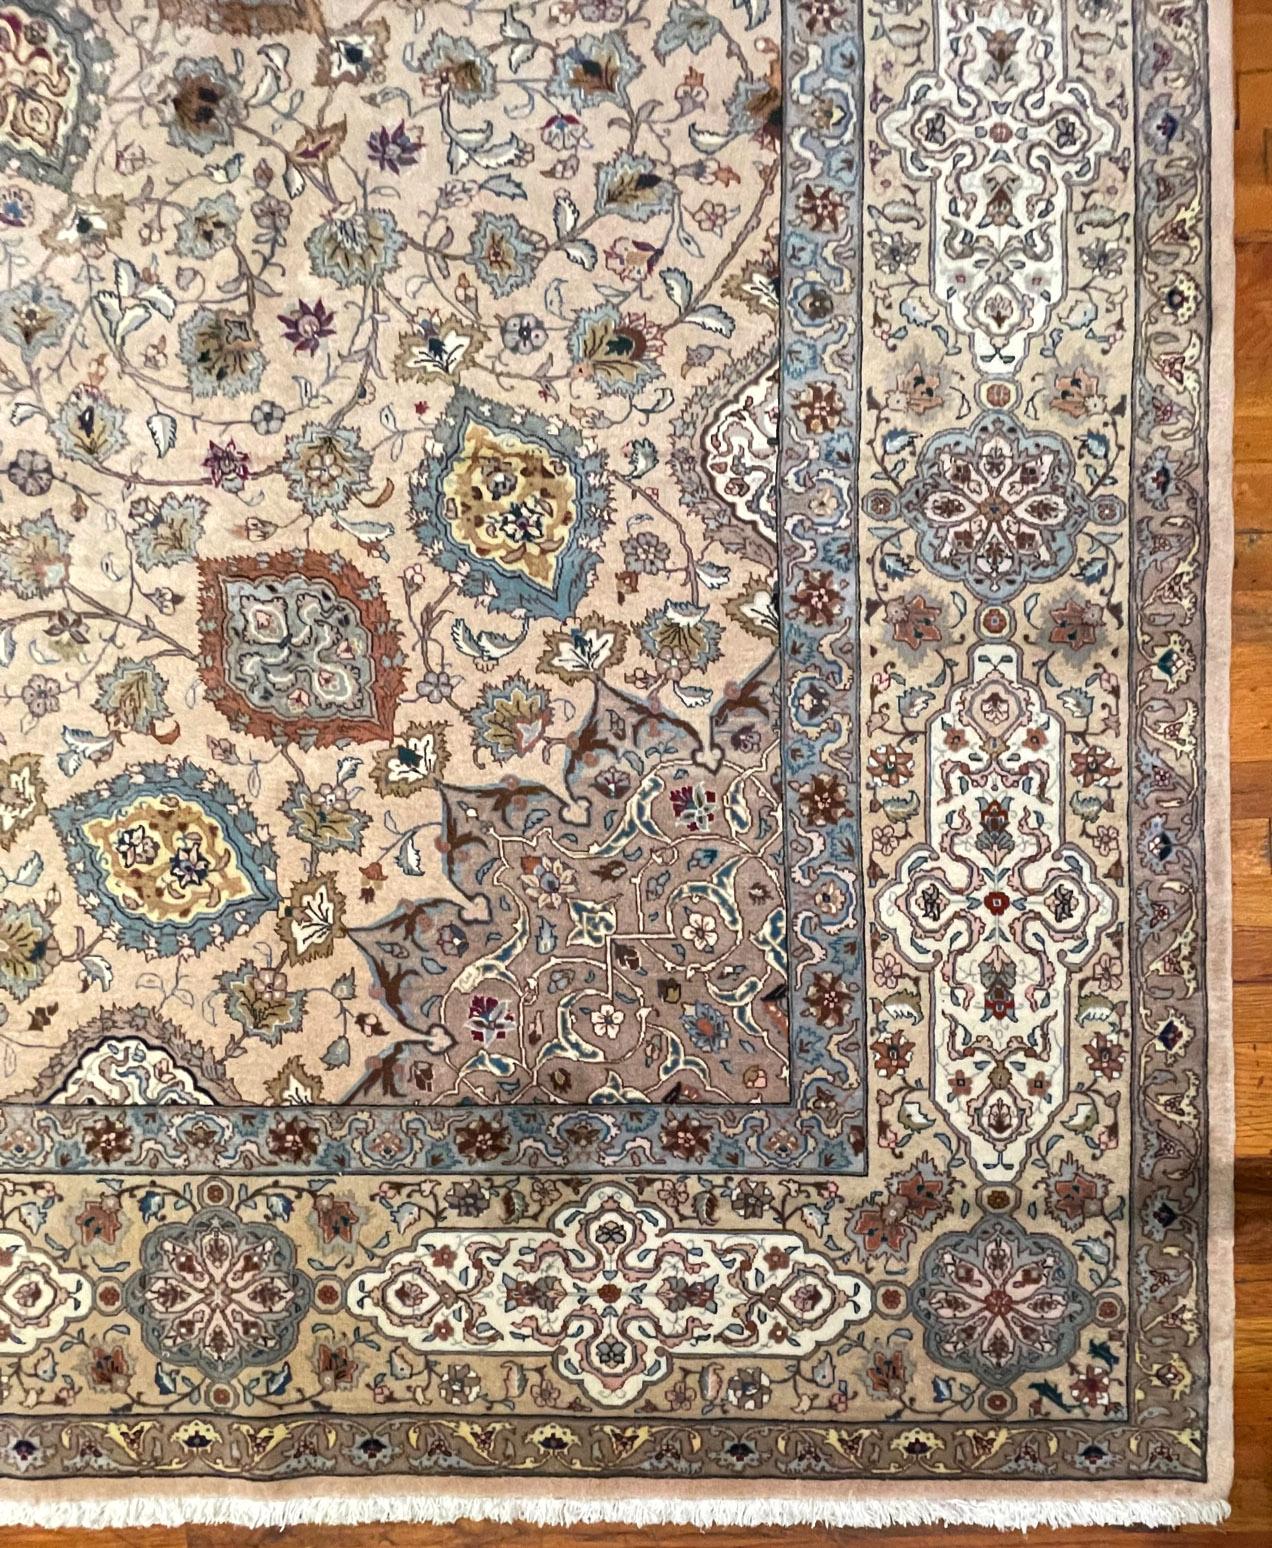 Authentic Persian Hand Knotted Floral Sheikh Safi Design Tabriz Rug, 1970 For Sale 2